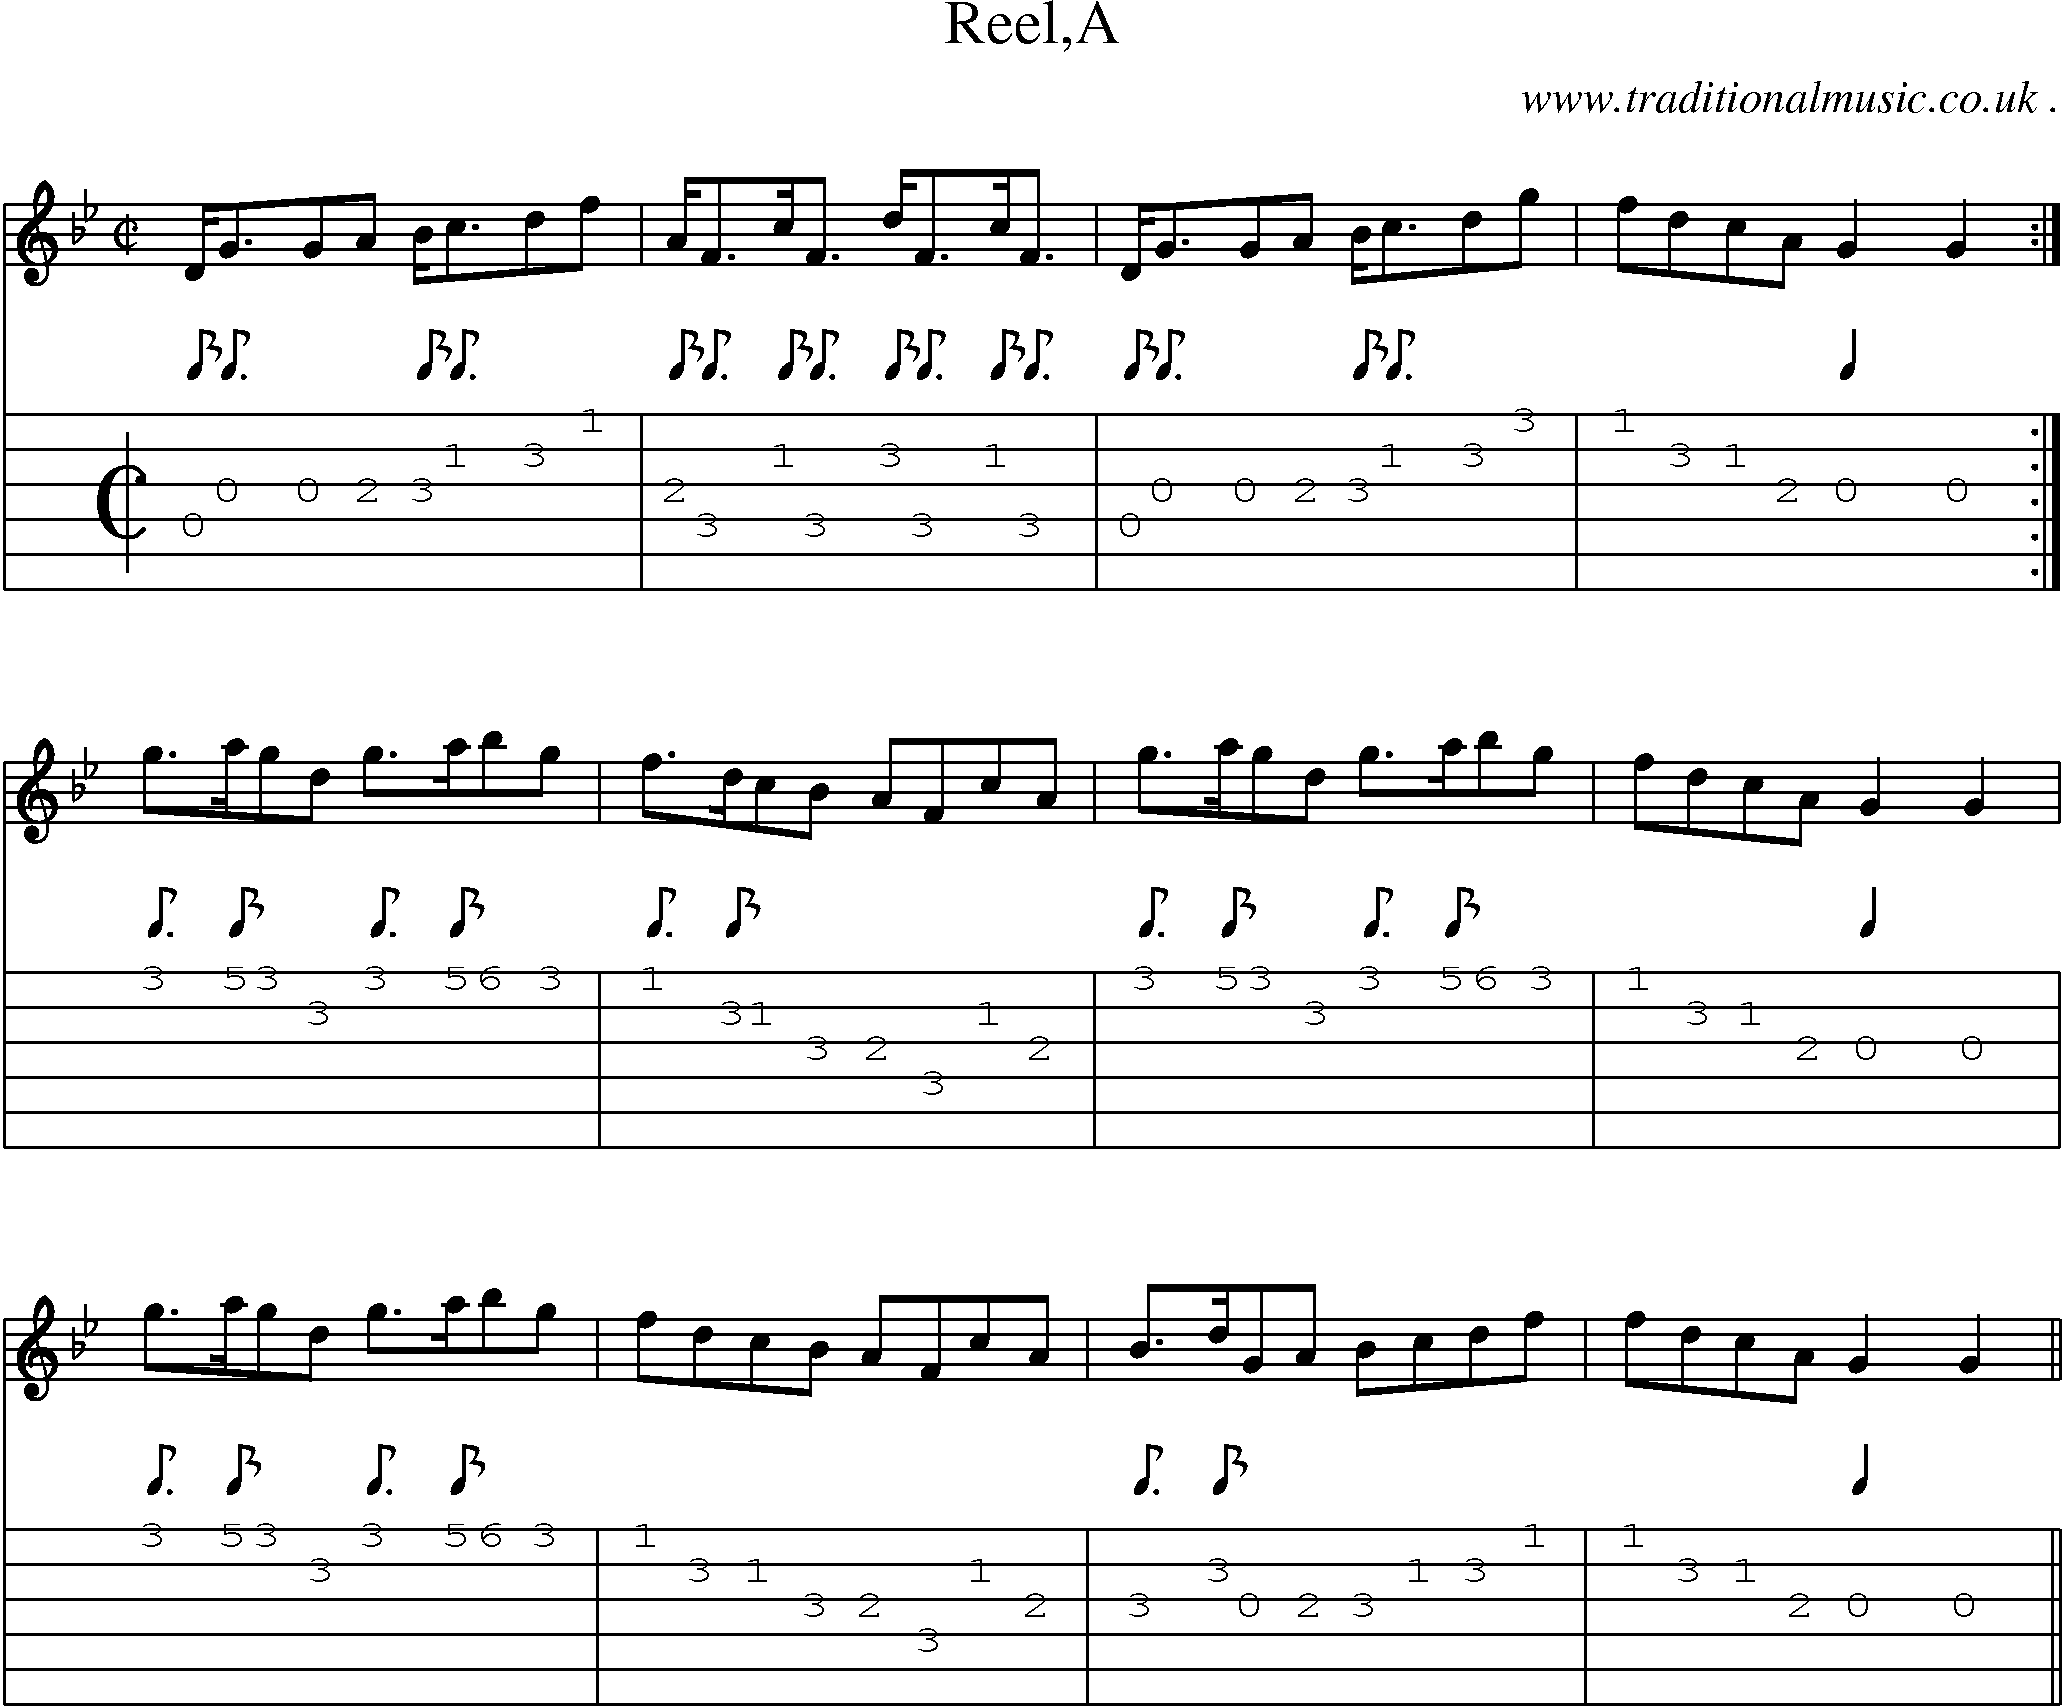 Sheet-Music and Guitar Tabs for Reela